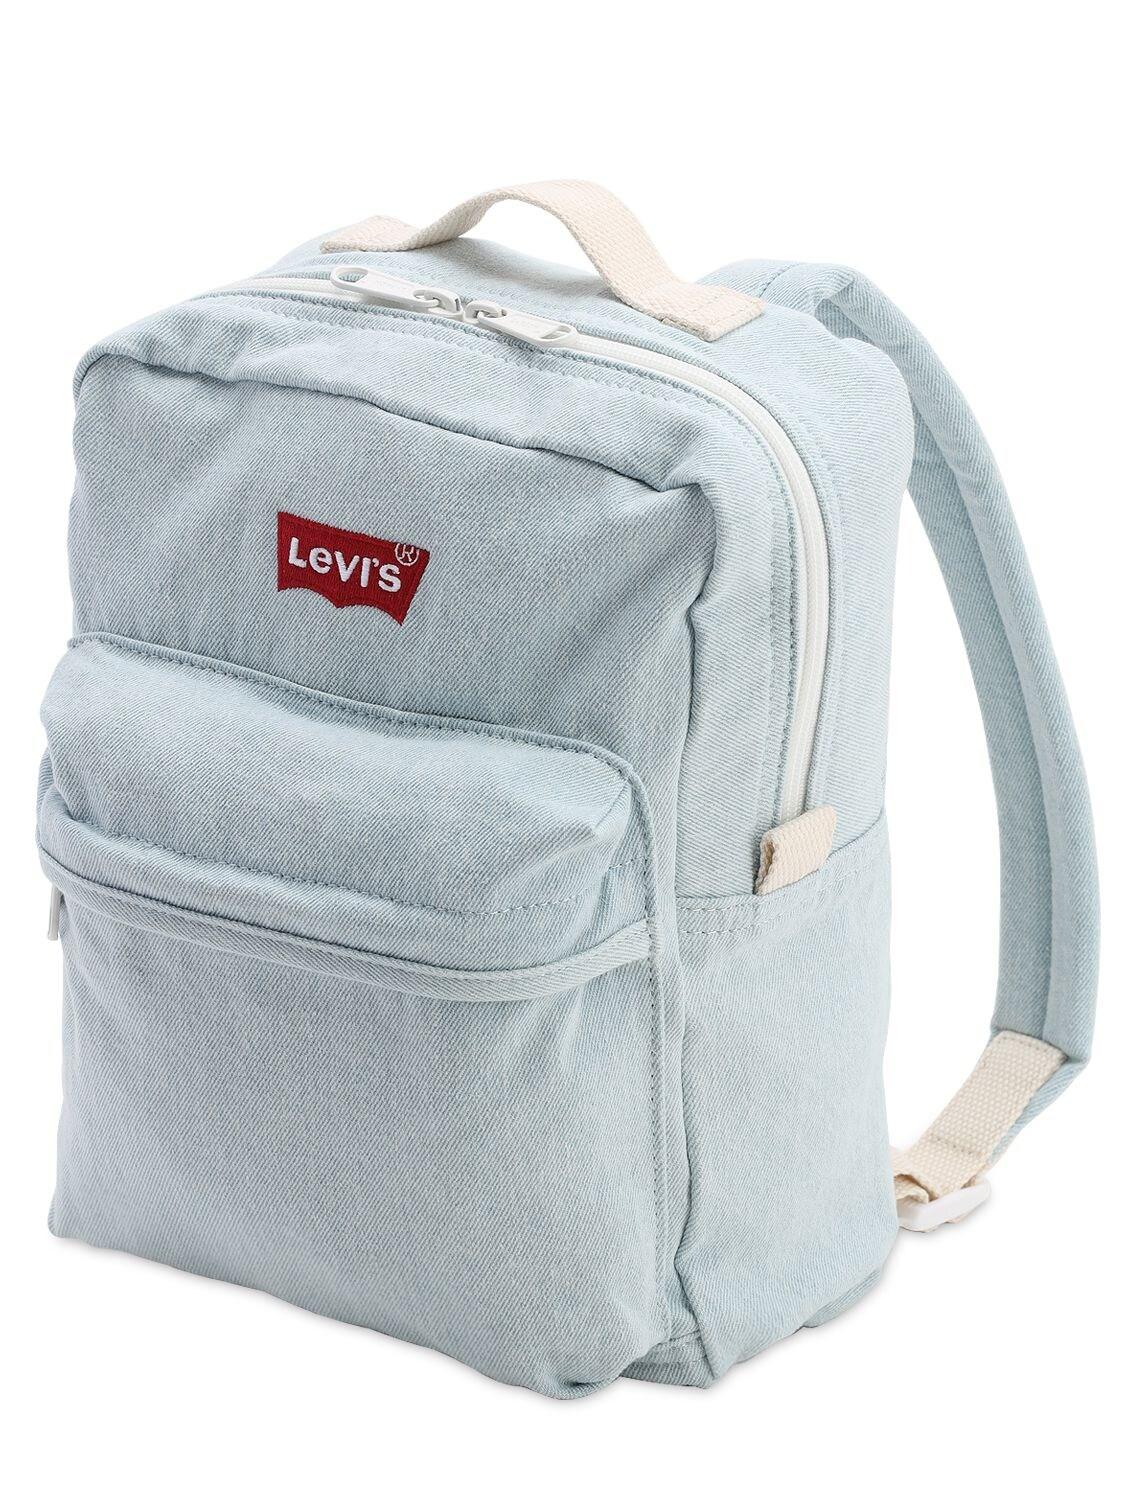 Levi's The Levi's L Pack Baby Backpack in Light Blue (Blue) | Lyst